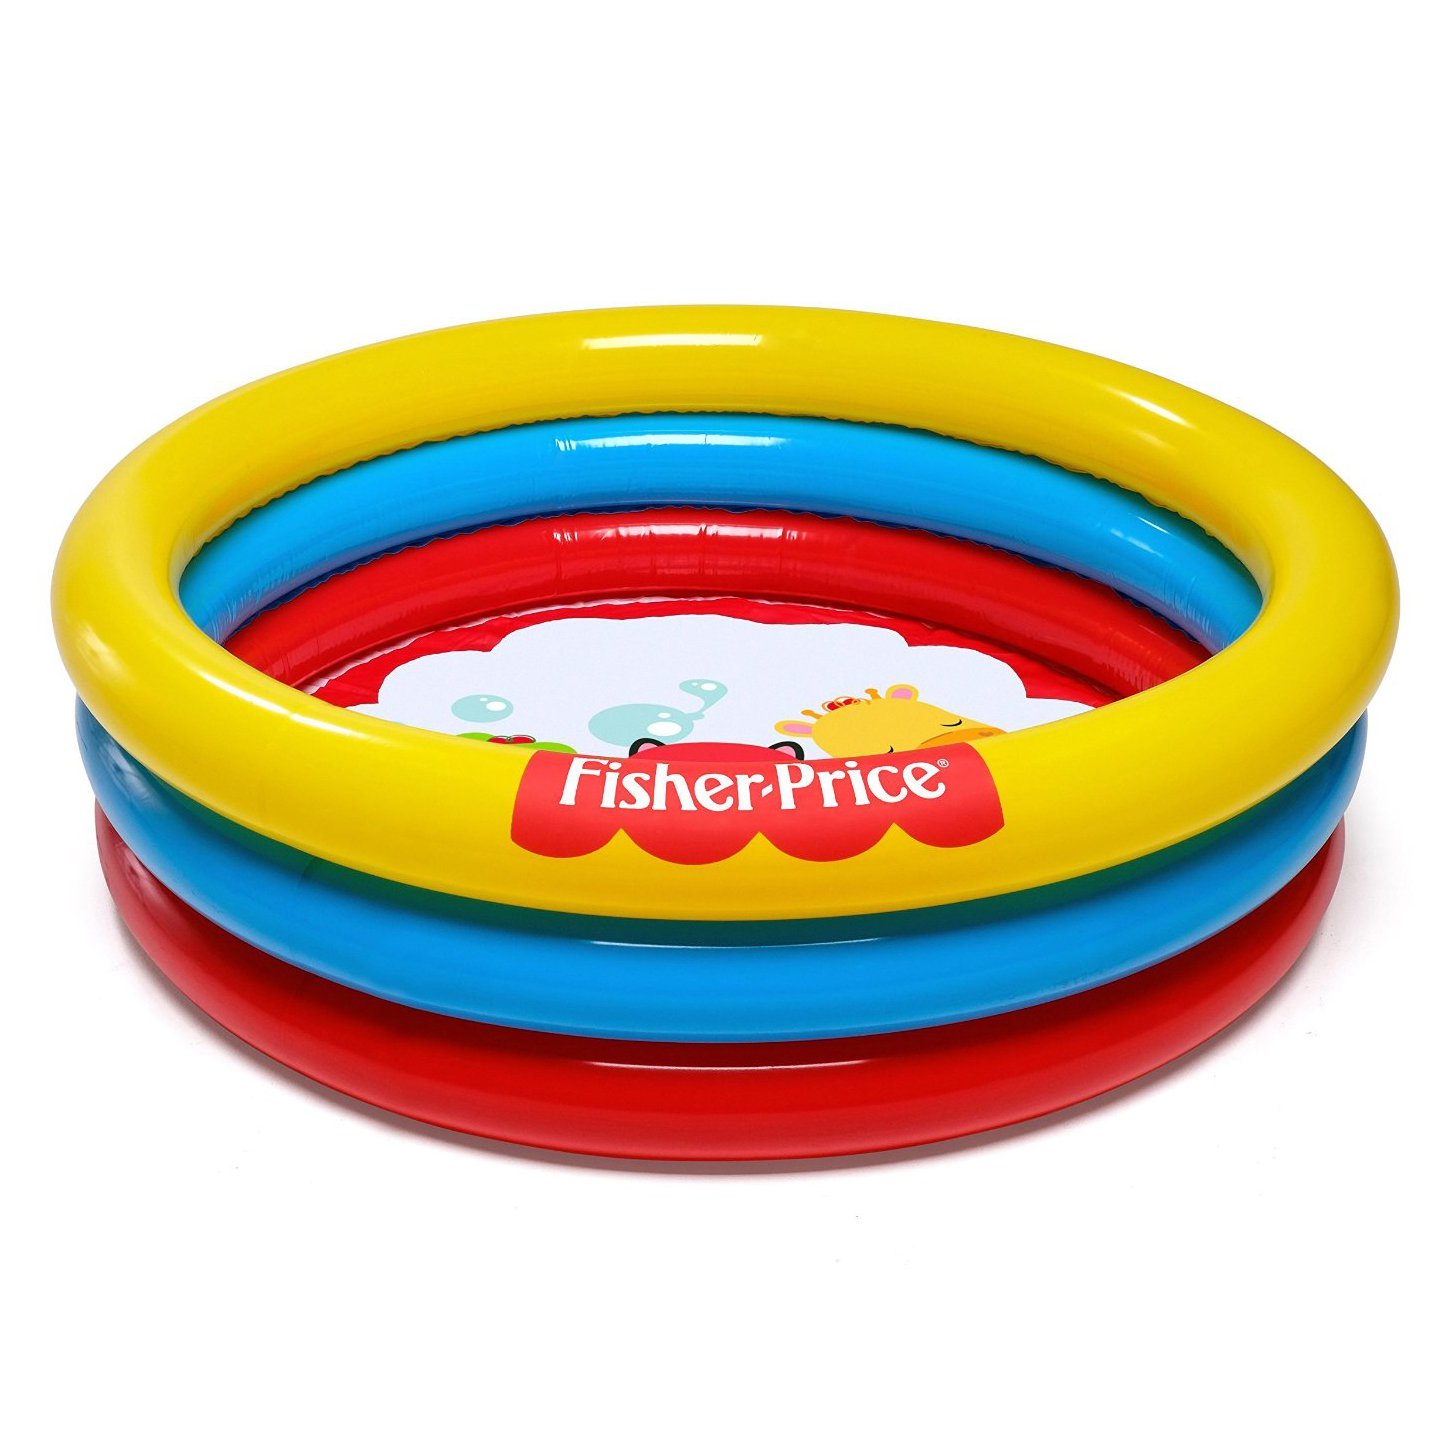 fisher price inflatable pool ball pit